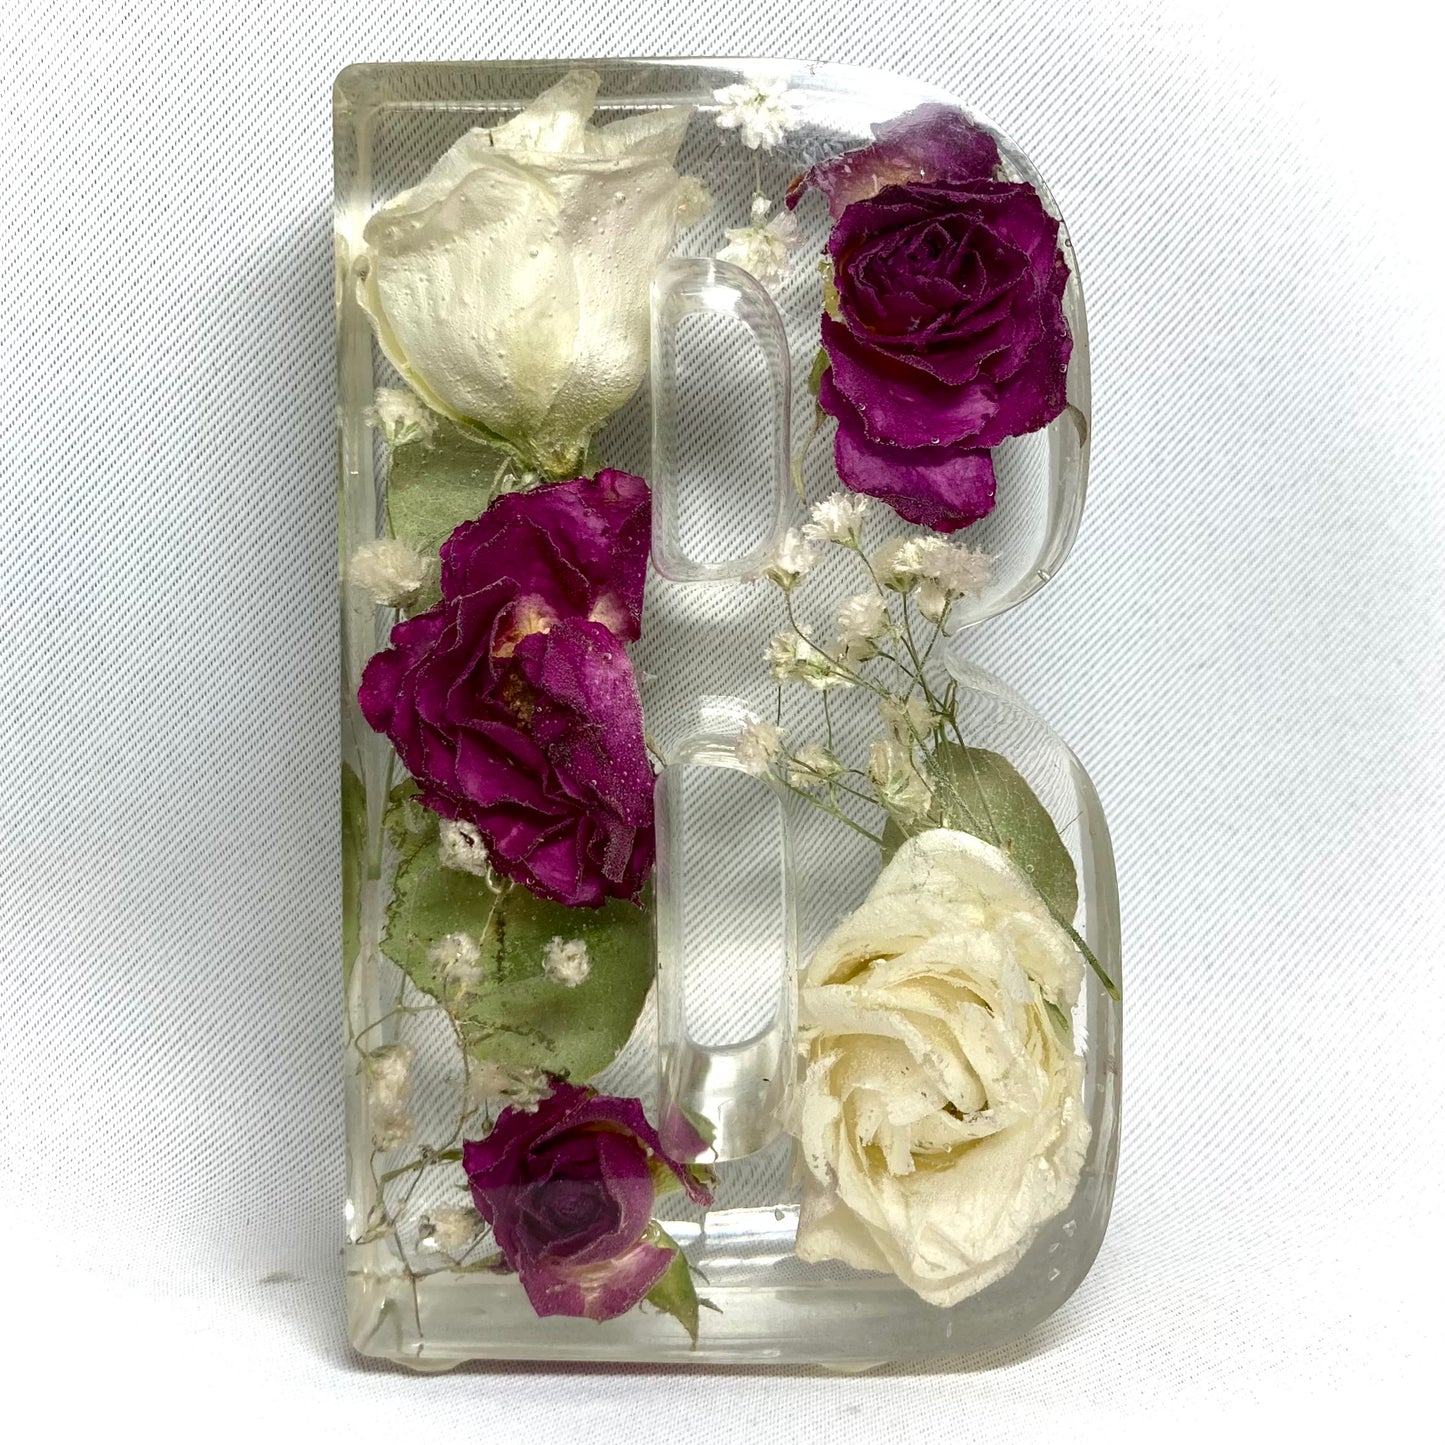 11cm freestanding letter B featuring pink spray roses, white lisianthus, gypsophila and eucalyptus